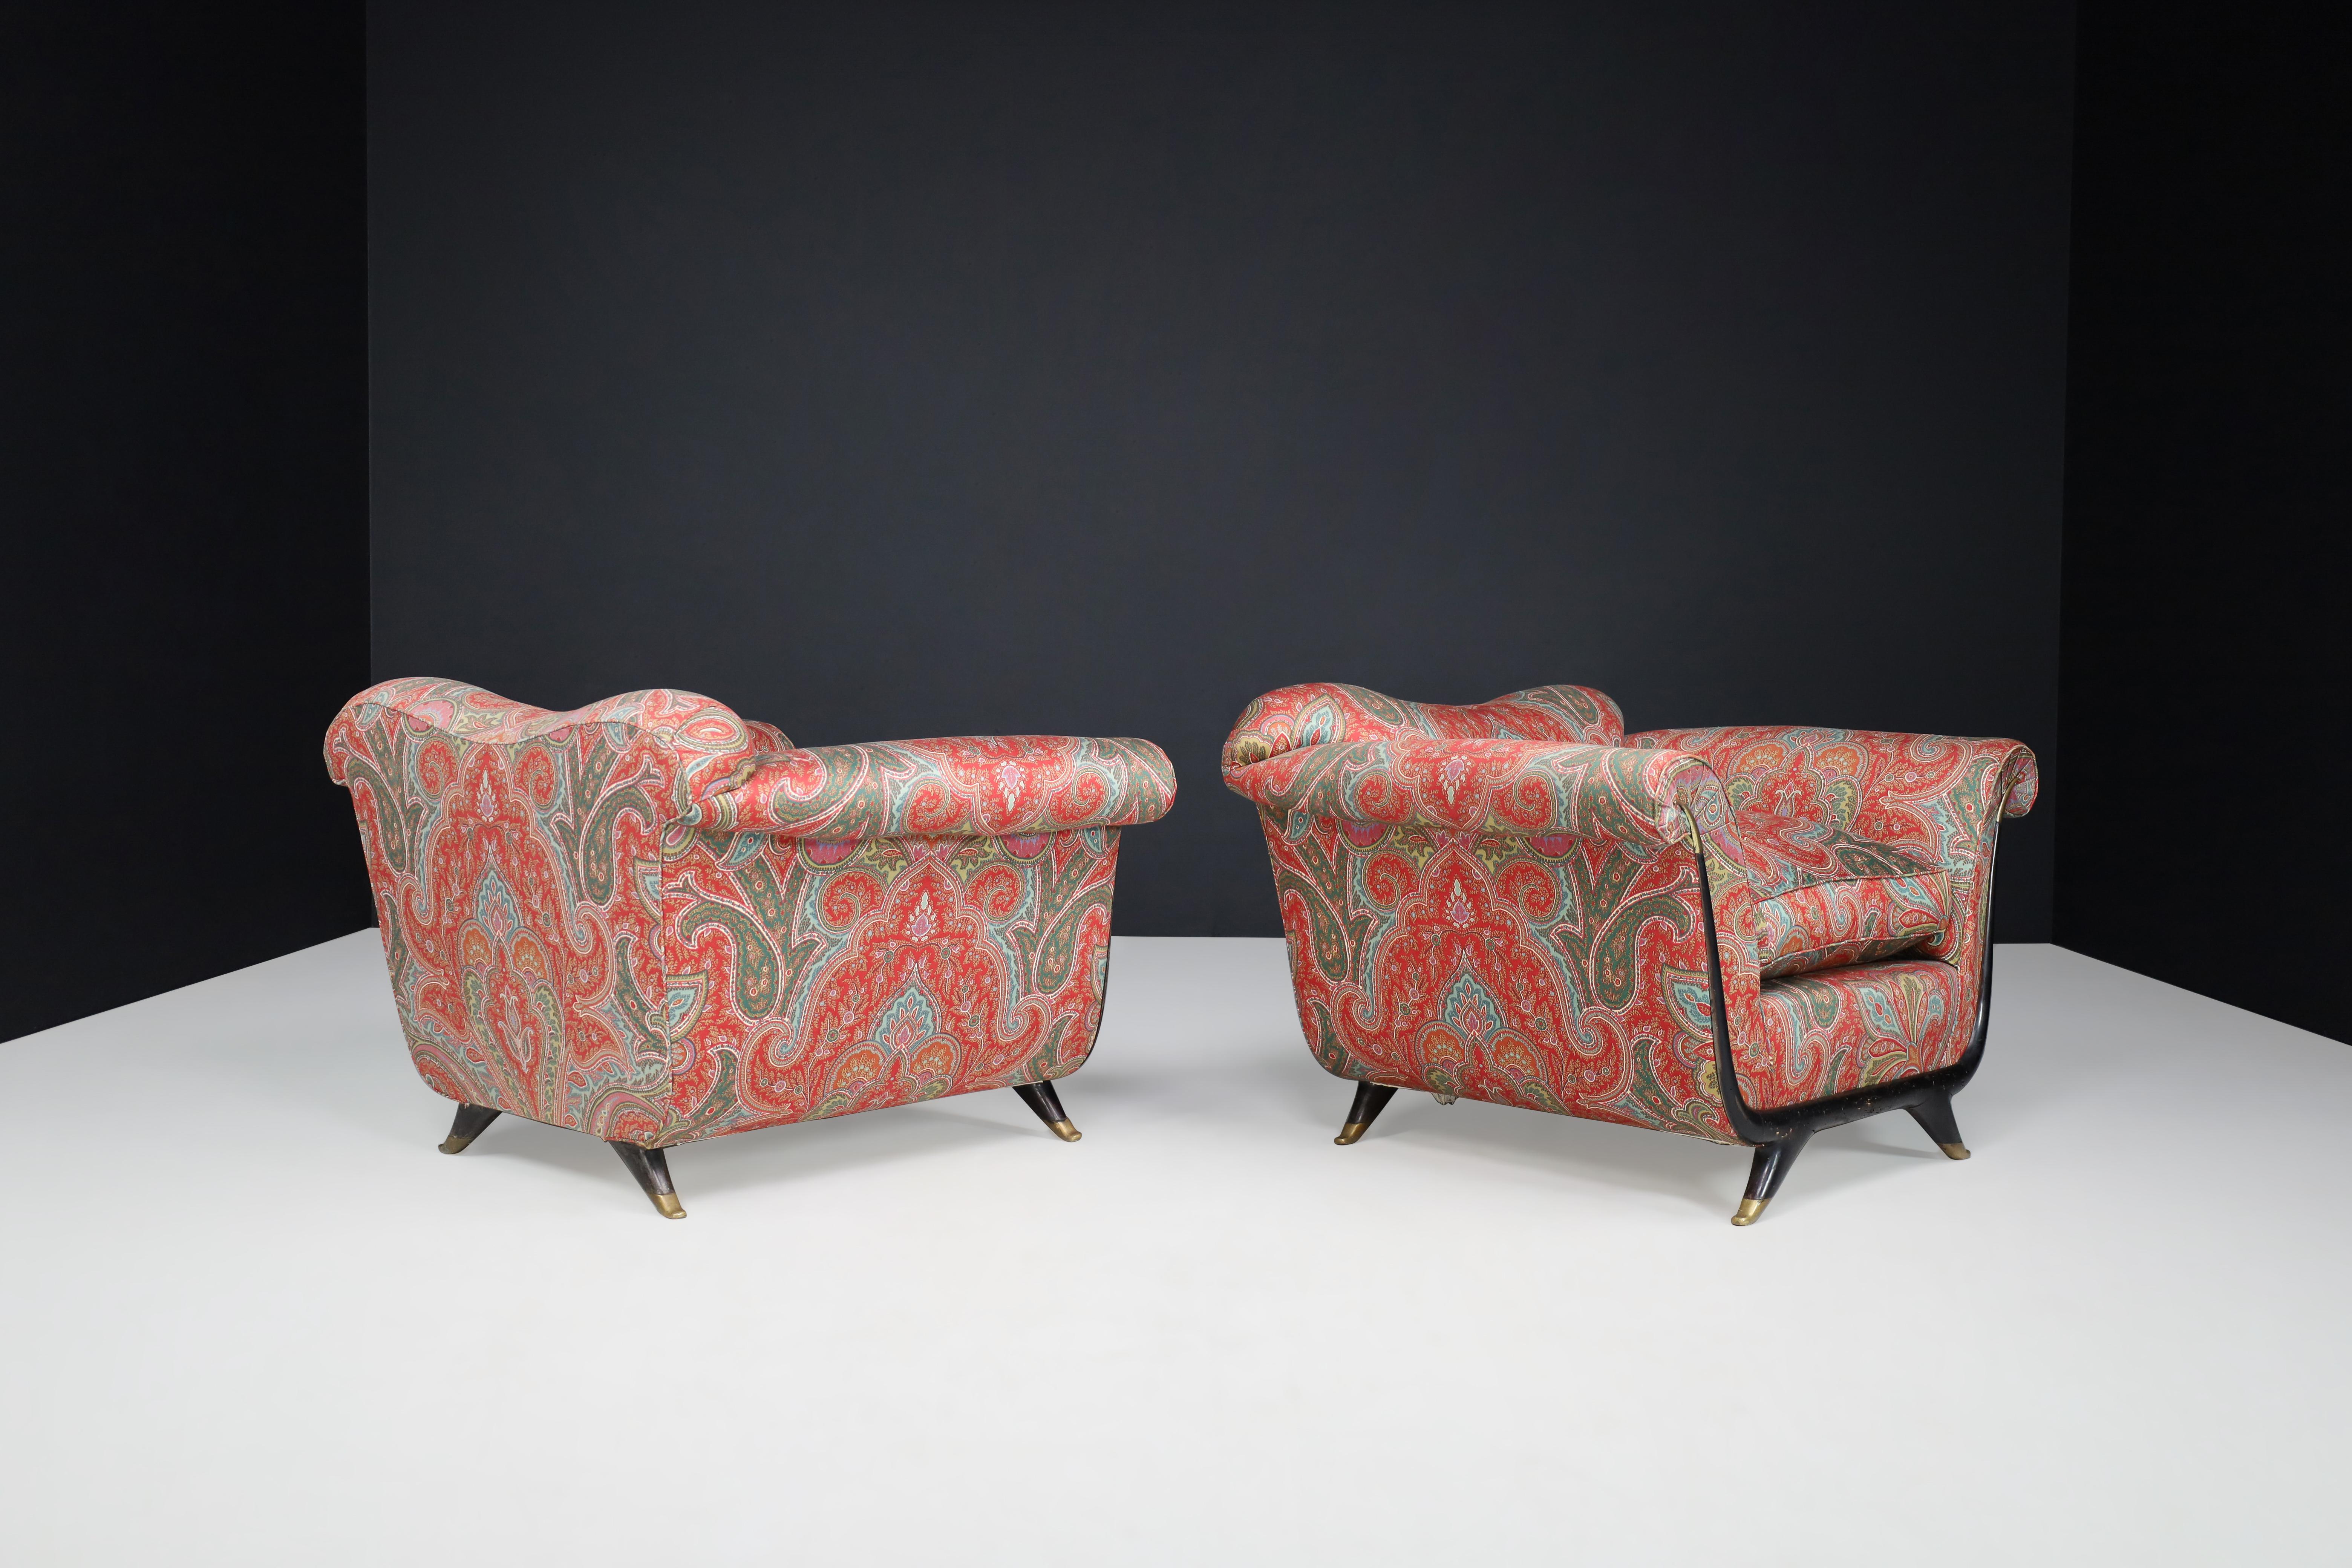 Guglielmo Ulrich Lounge Chairs in Walnut, Fabric, and Brass, Italy, 1930s  For Sale 7